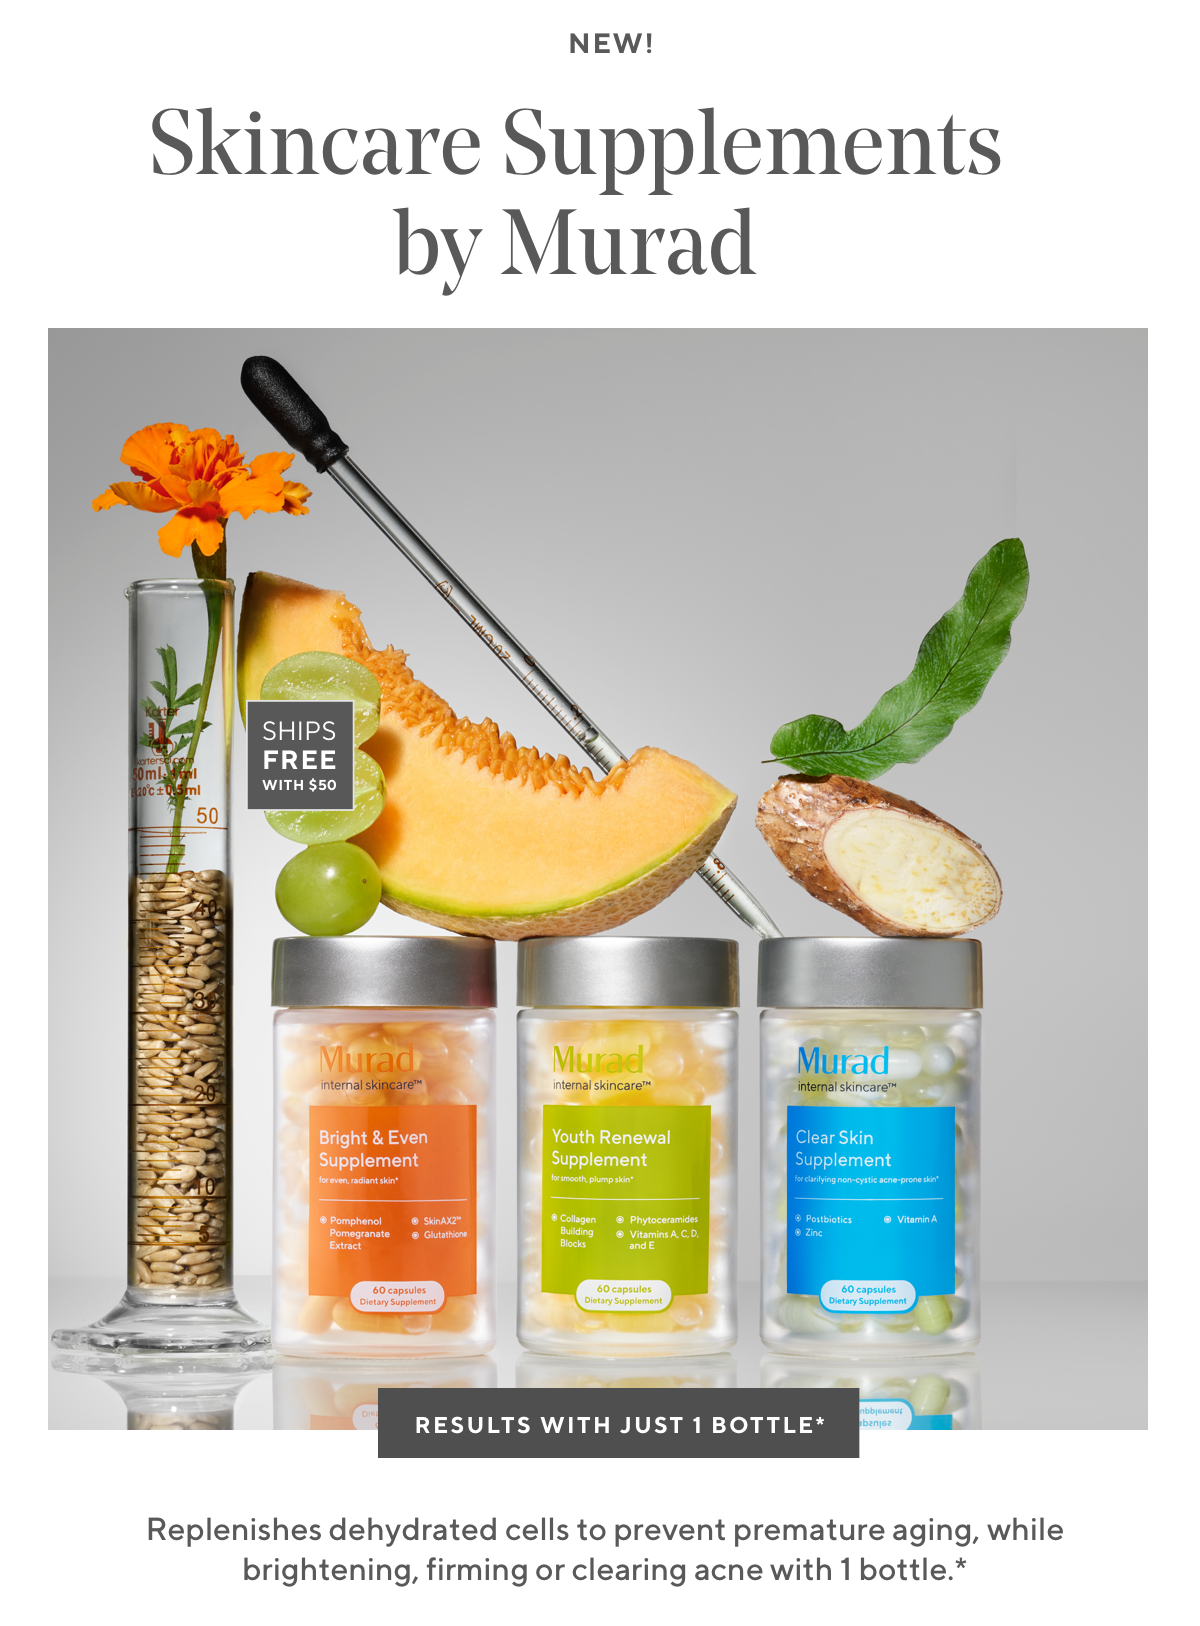 Skincare Supplements by Murad